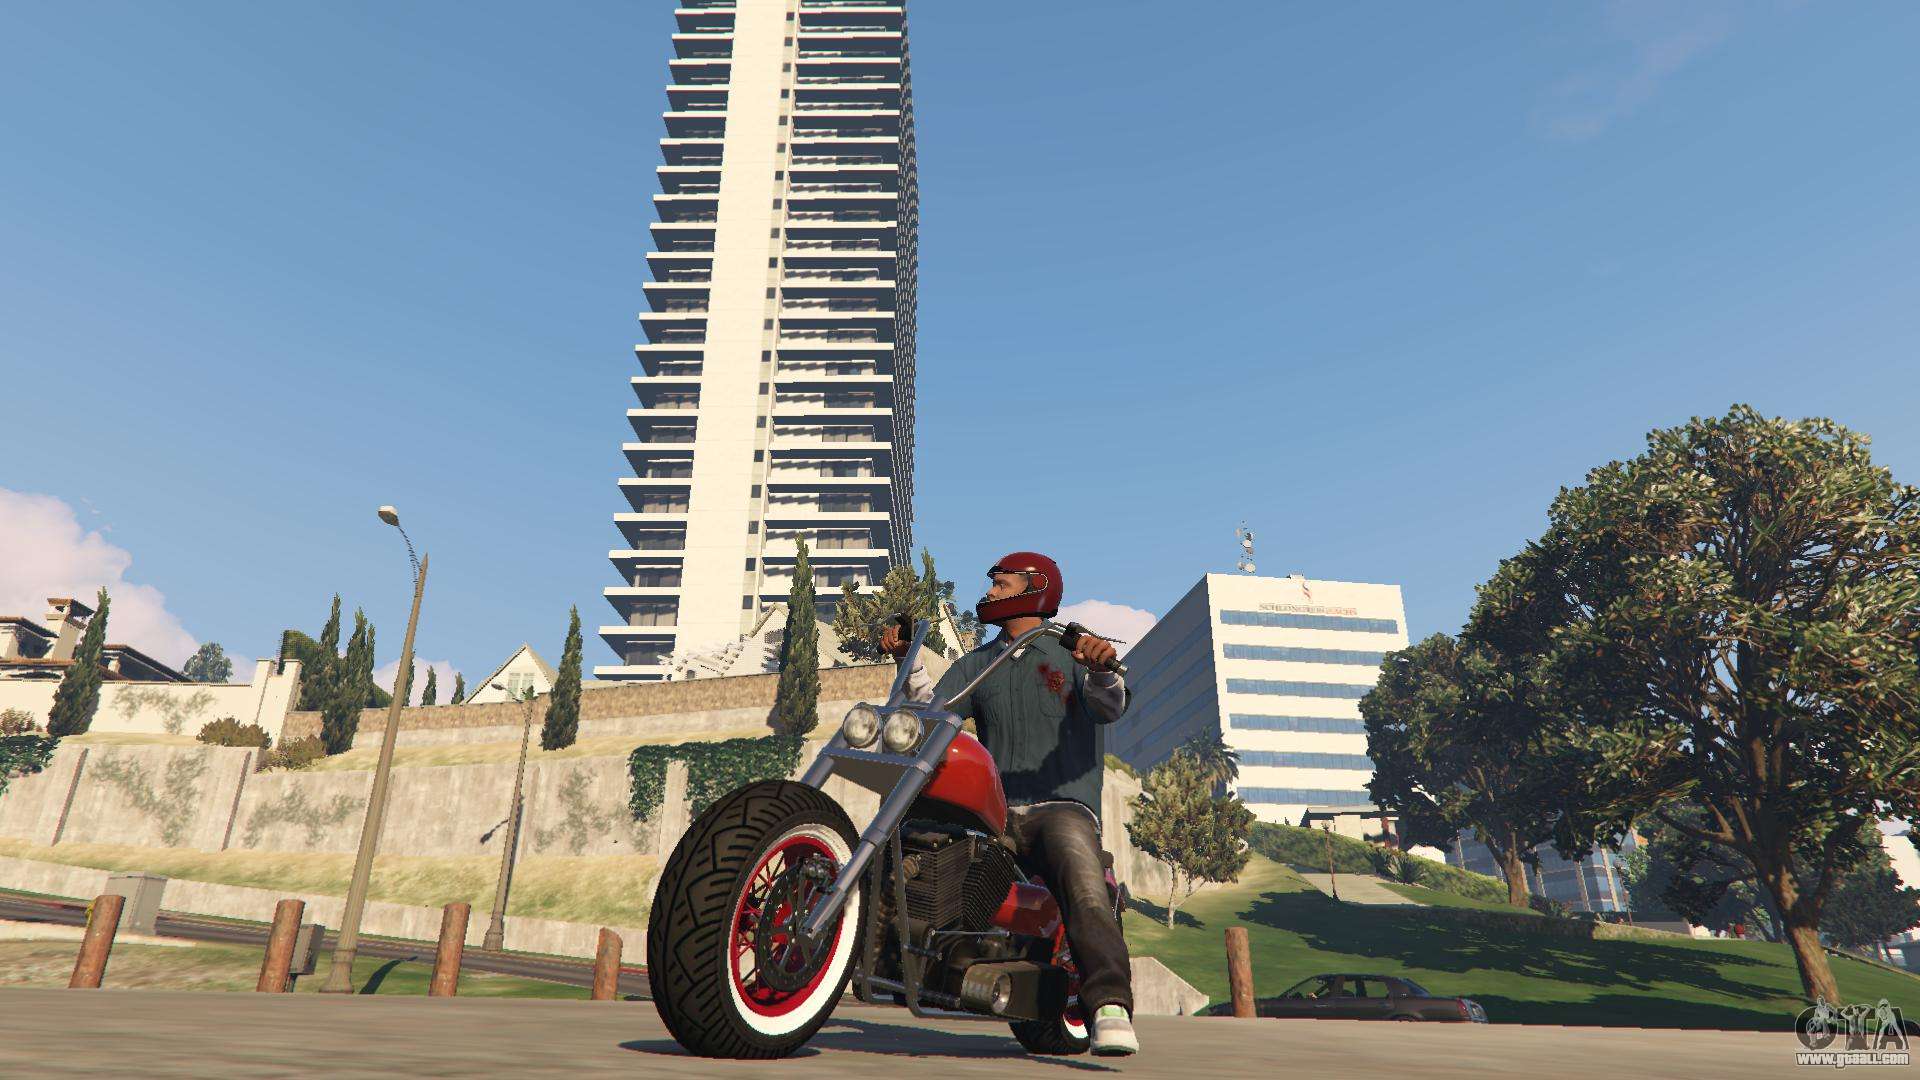 To become President of the motorcycle club in GTA 5 online: is it possible